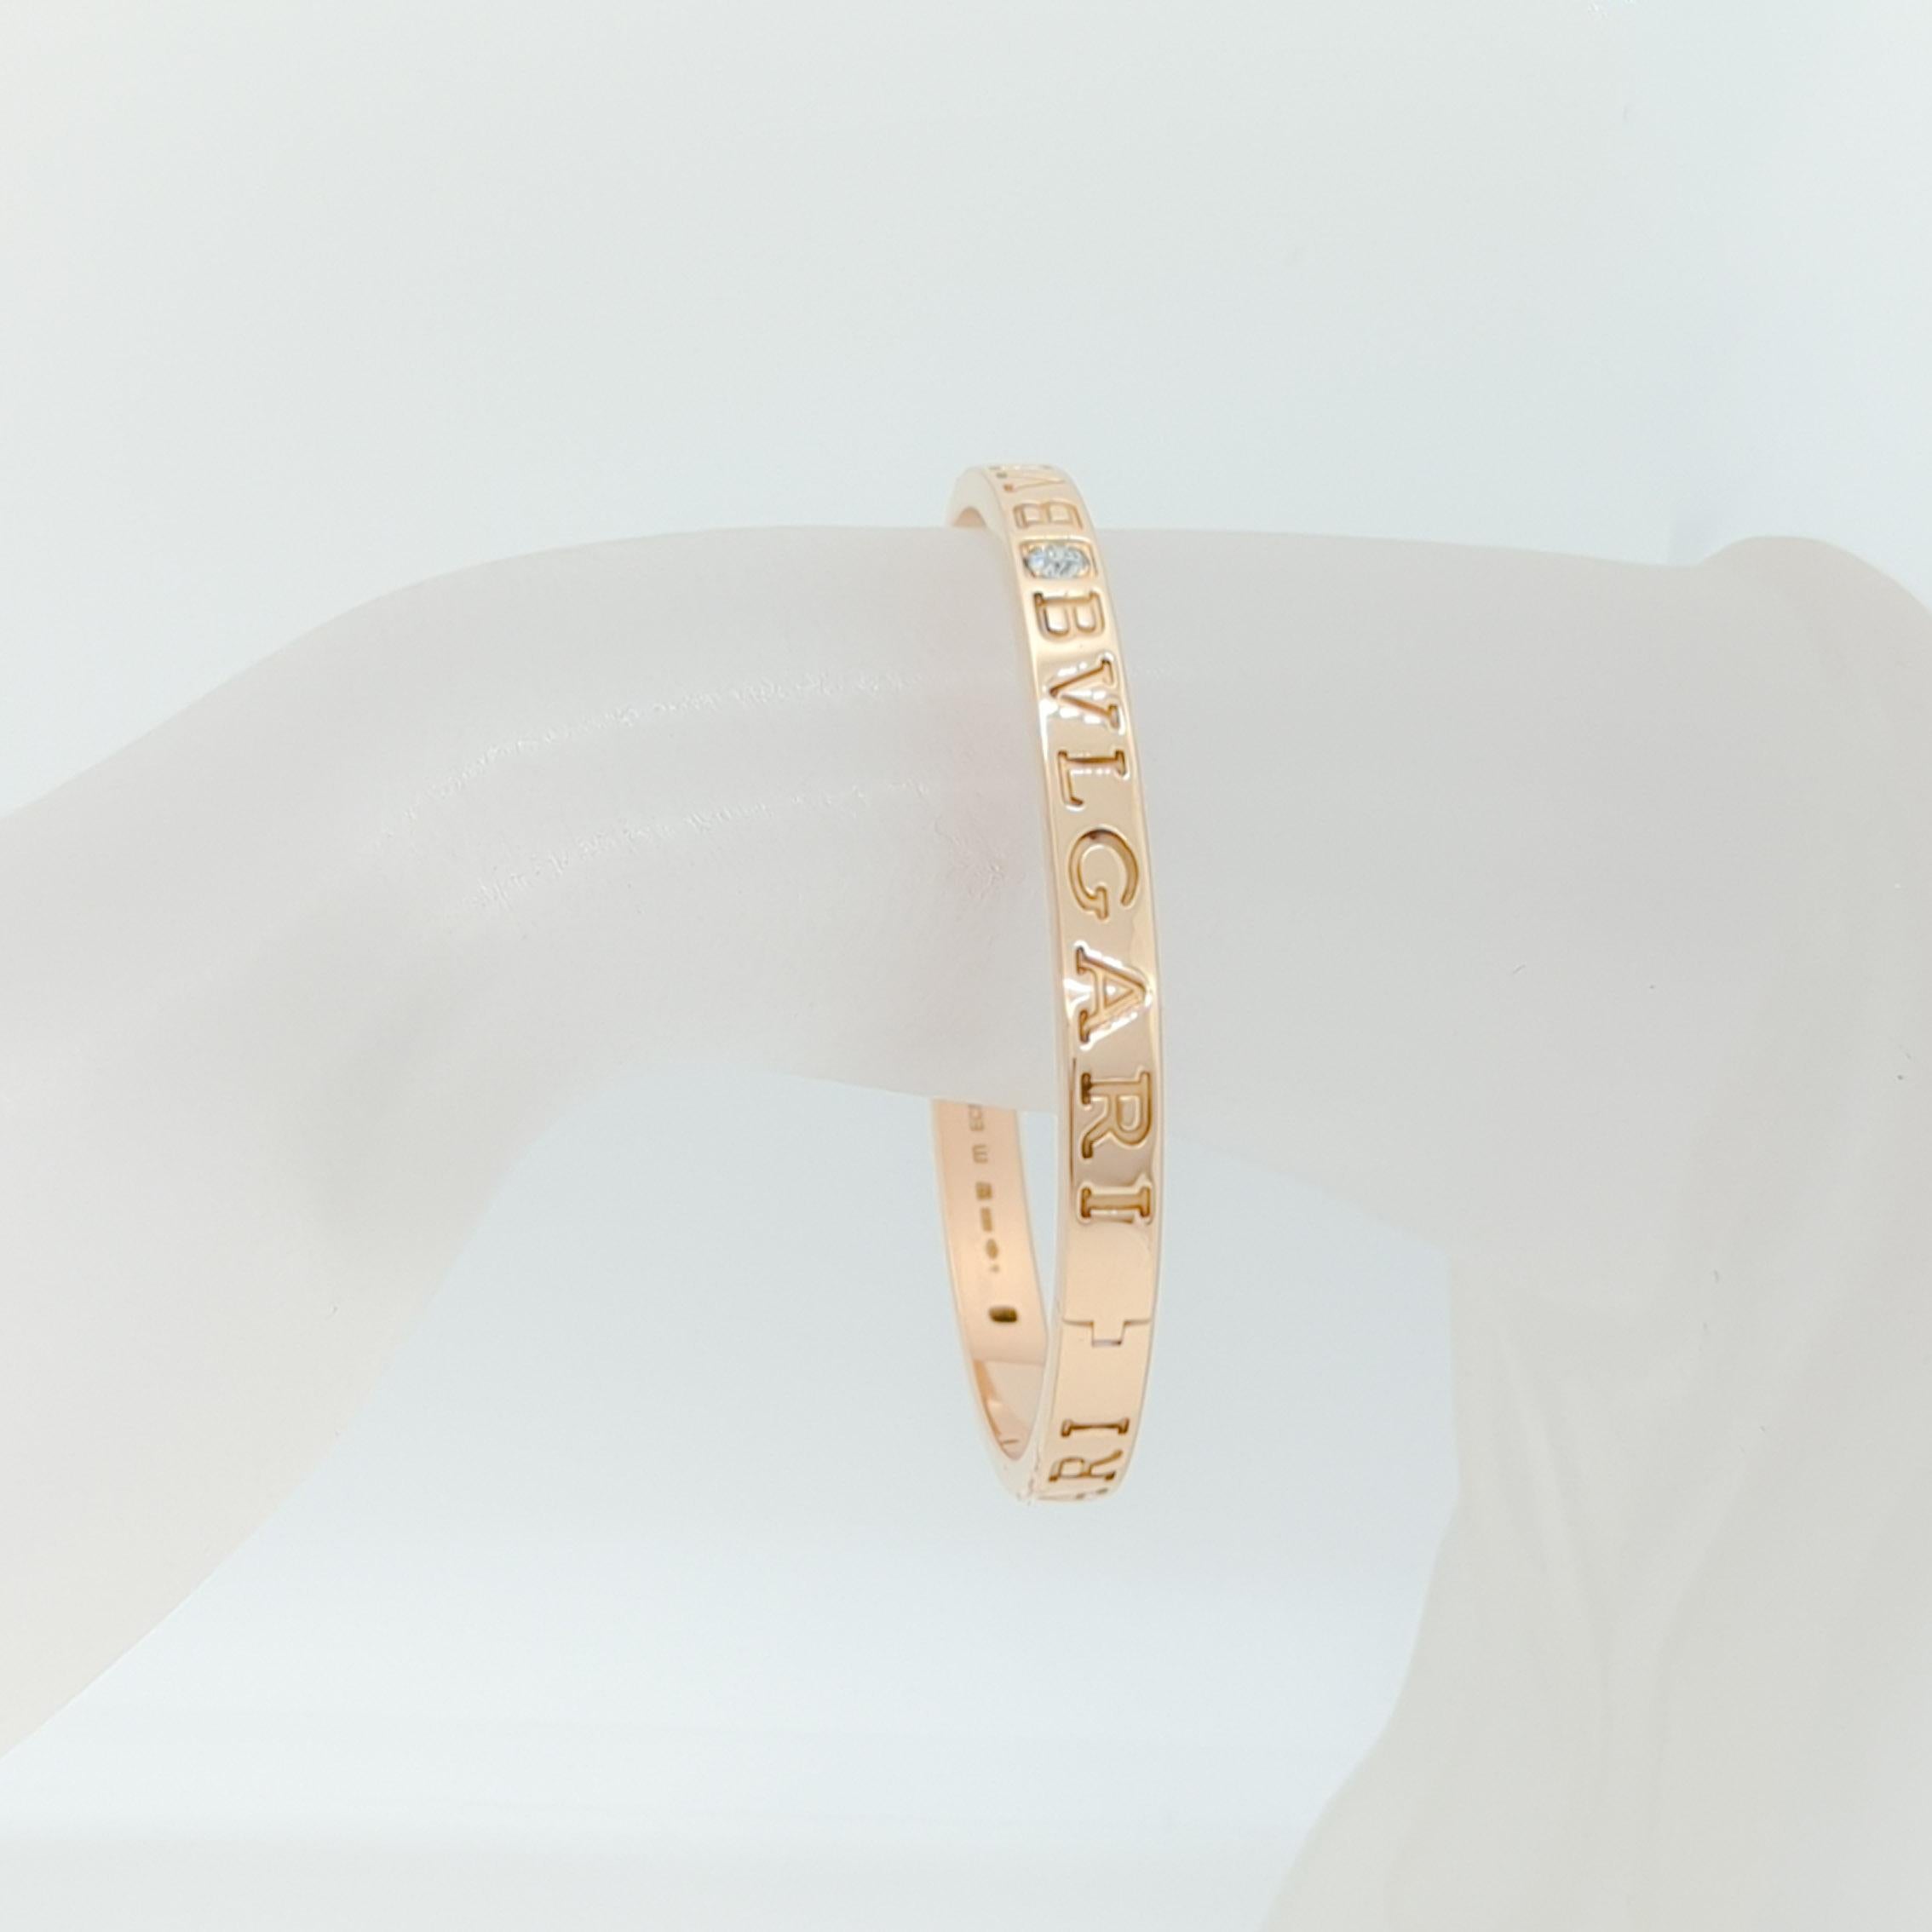 Stunning Bvlgari bangle with big white diamond rounds handmade in 18k rose gold.  A great addition to your arm stack or to wear on it's own.